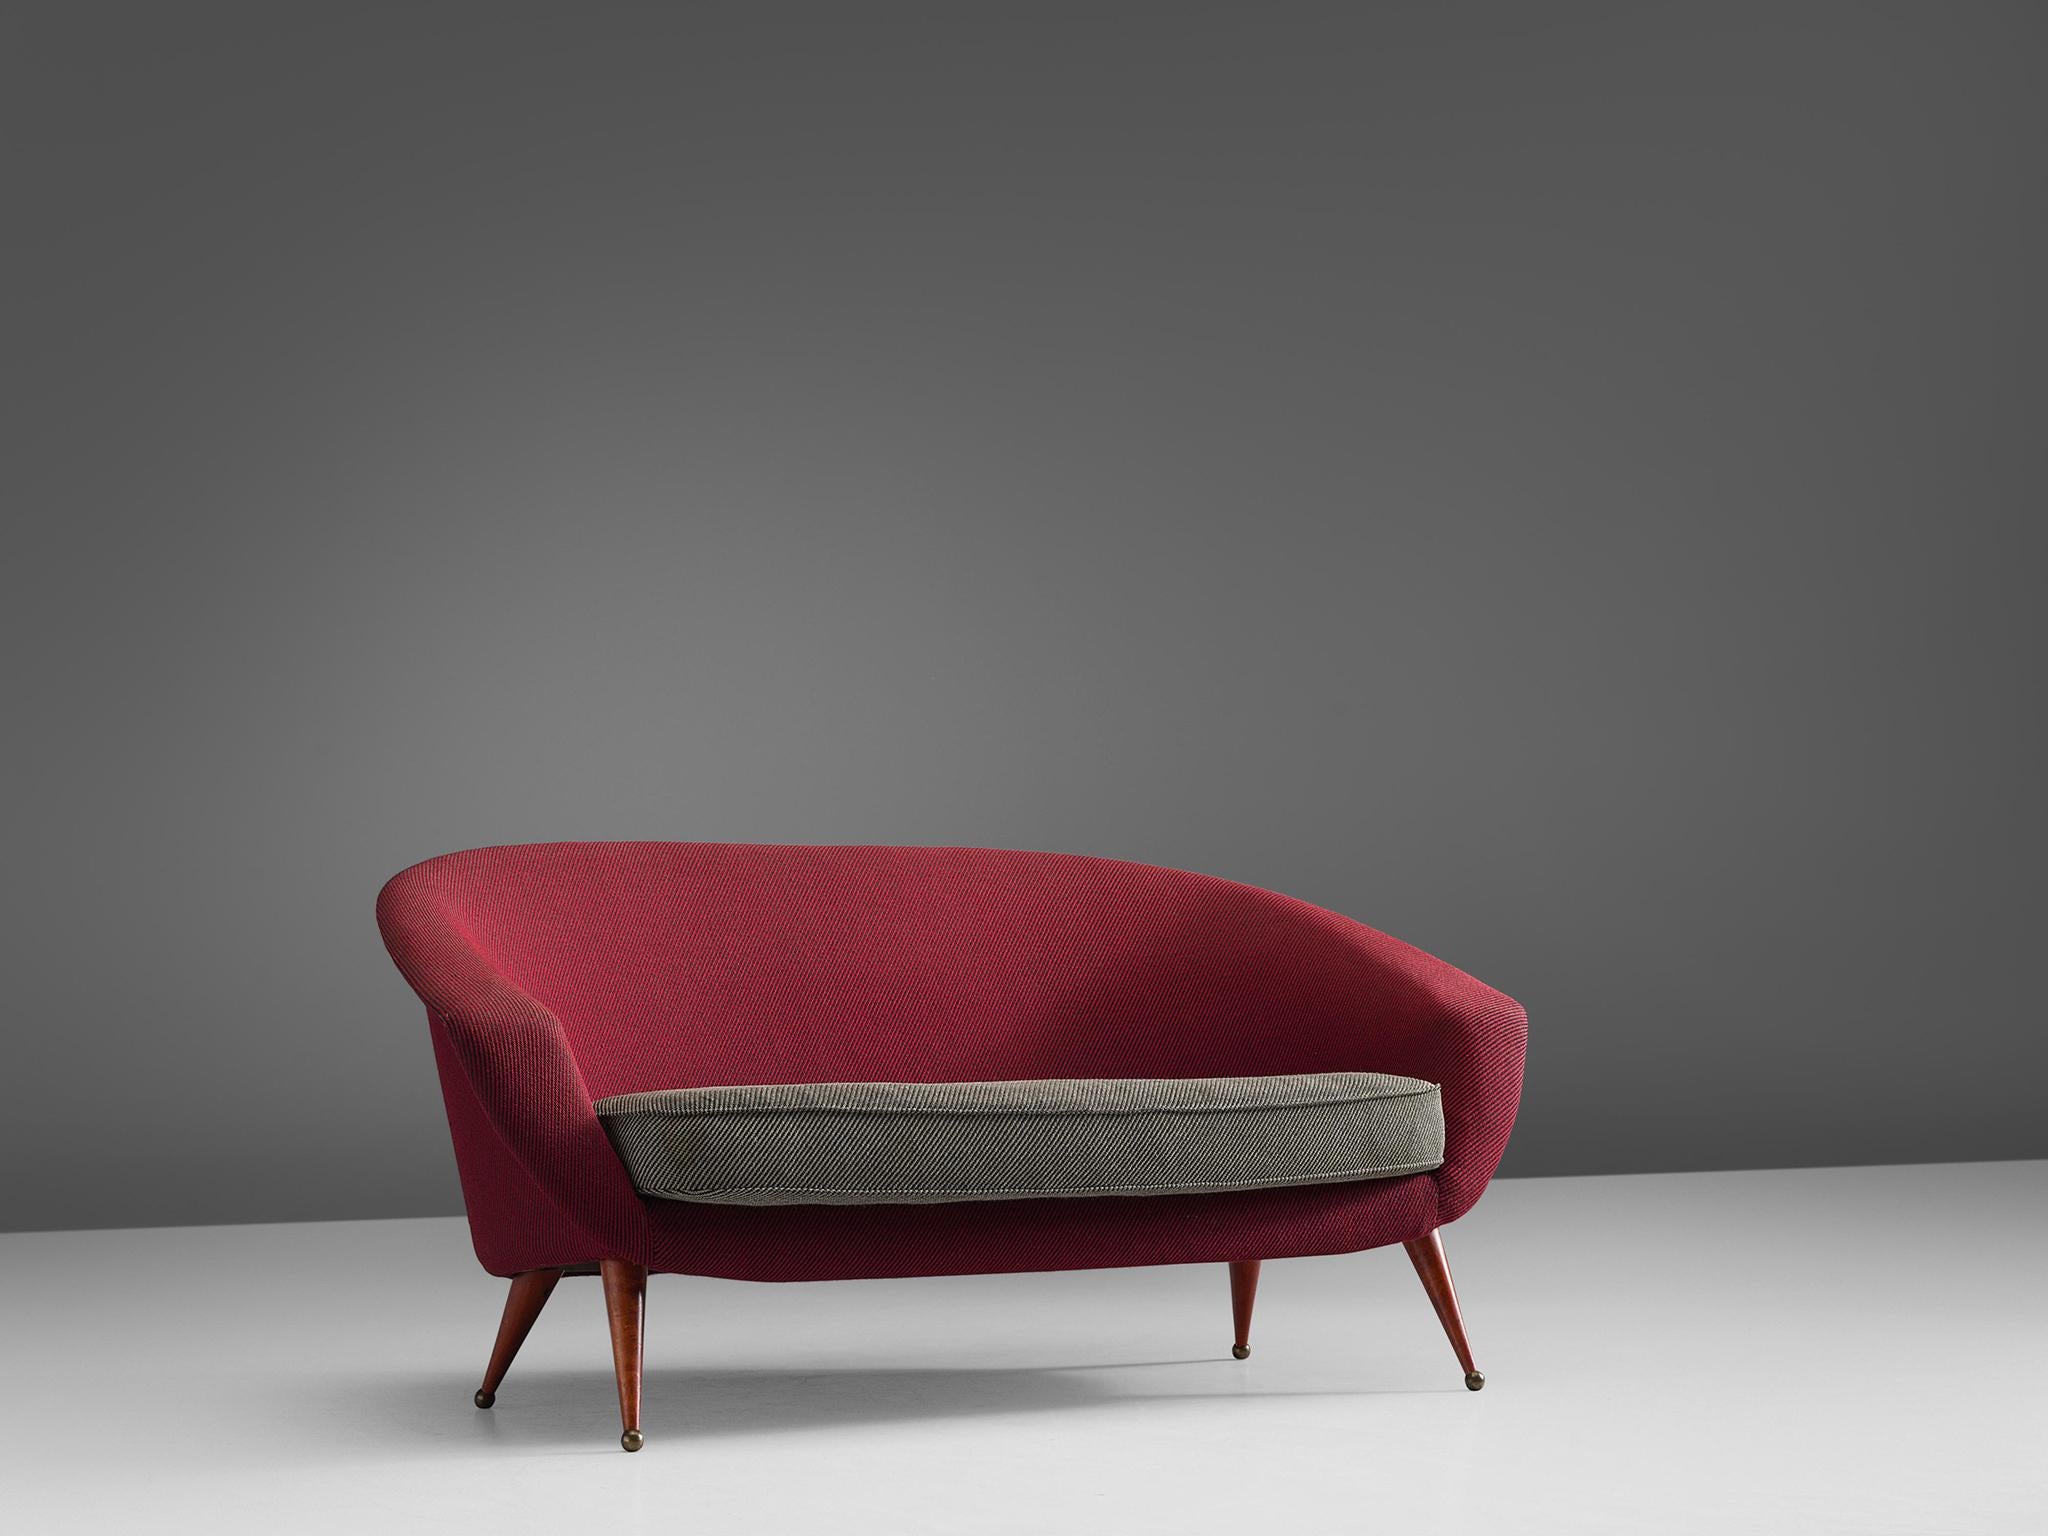 Loveseat 'Tellus', in red and grey fabric, wood and brass, by Folke Jansson, for S.M. Wincrantz, Sweden, 1956.

Elegant sofa by Swedish designer Folke Jansson. This design shows beautiful flowing lines. Starting with the four stained wooden legs.